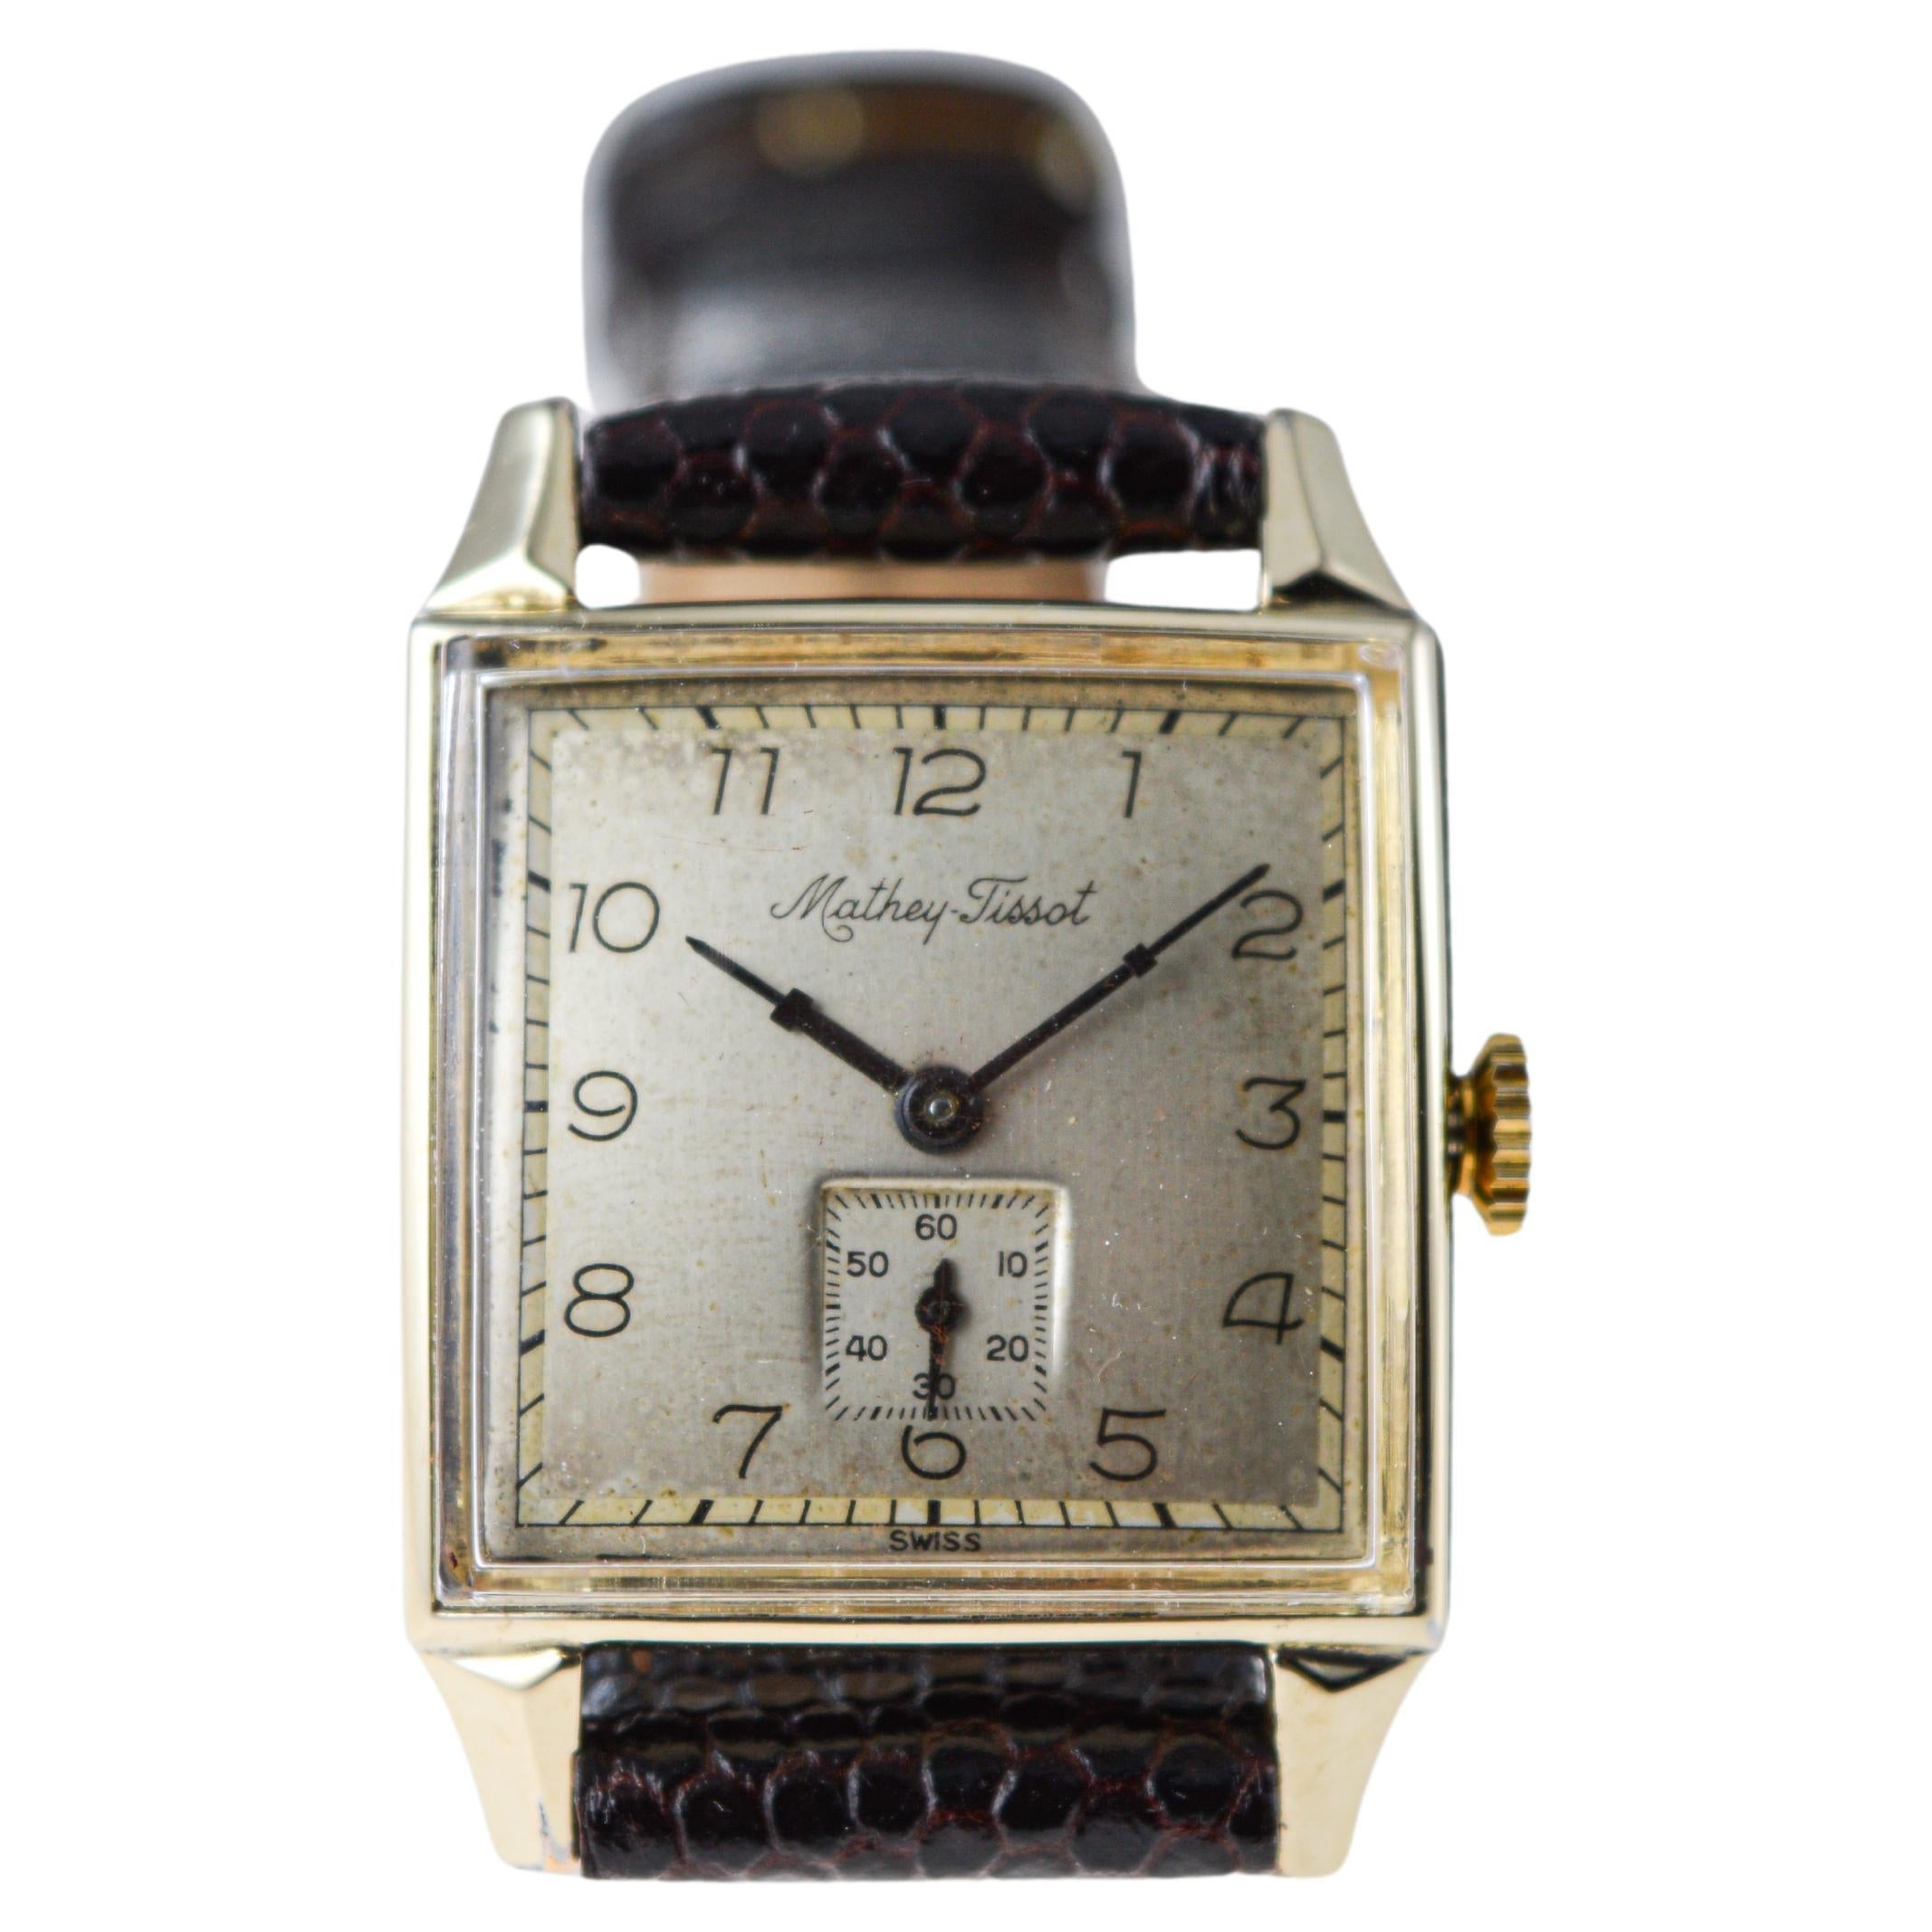 Mathey Tissot Gold Filled Watch in New Condition, Circa 1940's 1